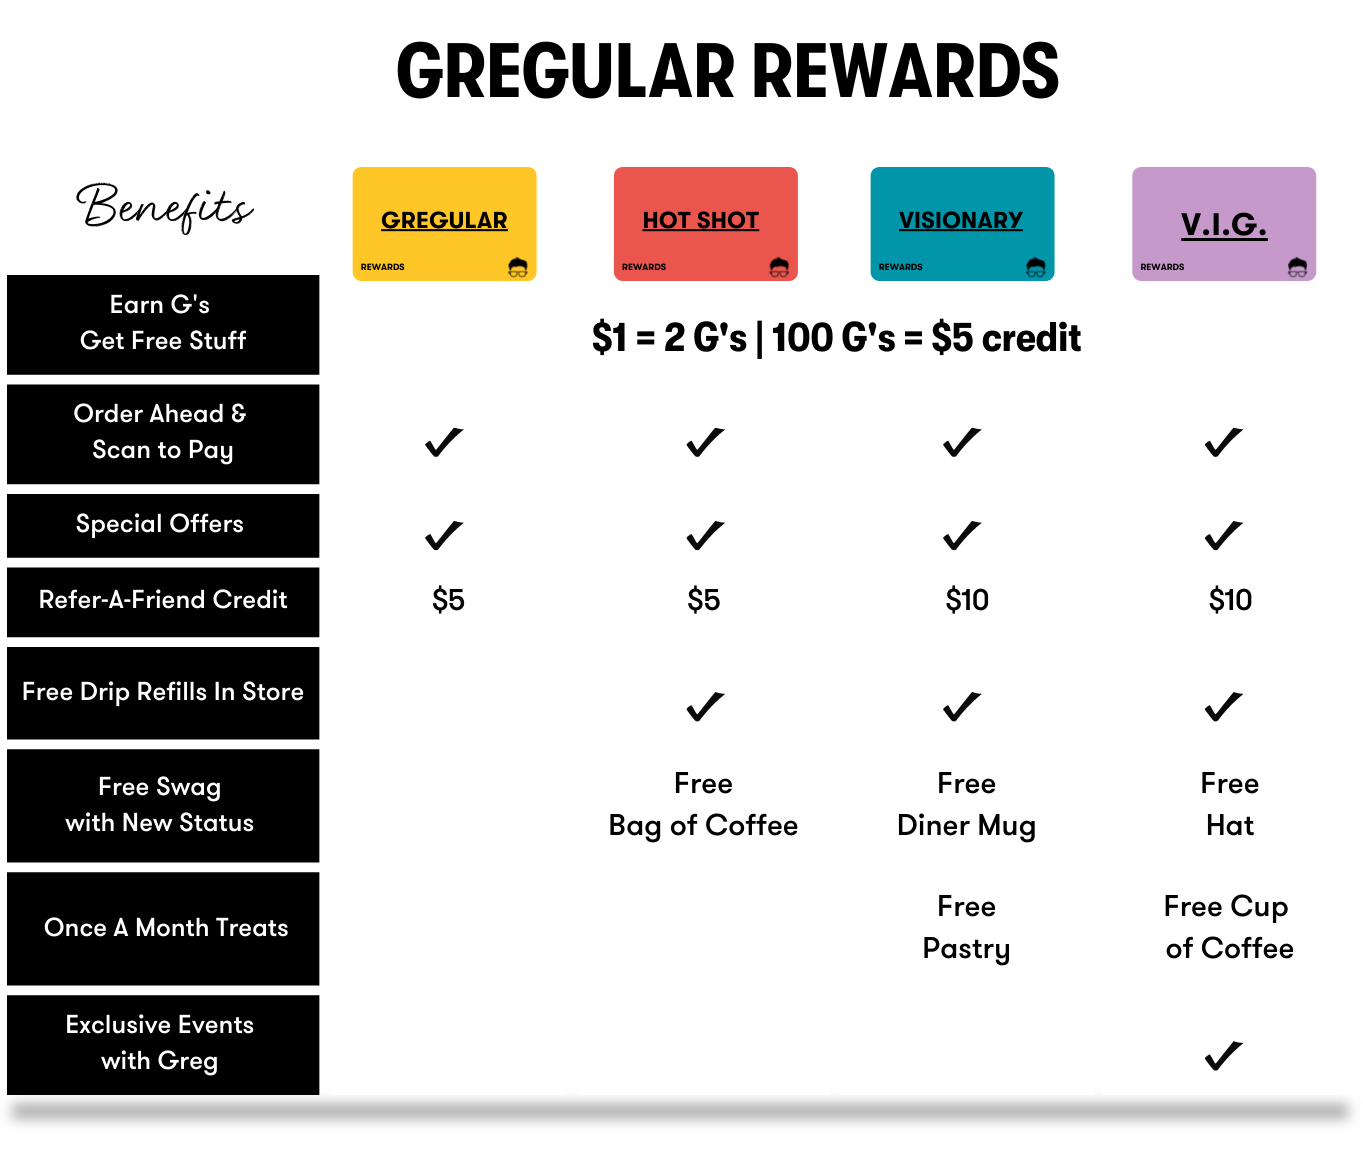 Gregulars Benefits: First Drink Free, Loyalty Program (Collect 100 G's, Get $5), Mobile Pay + Order Ahead, Birthday Treats, Gregular-only Promotions + Discounts, $5 Referral Credit. Hot Shot Benefits: Gregular Perkas PLUS Free In-Store Refills on Drip Coffee, Free Bag of Coffee, Access to Hot Shot only Promotions. Visionary Benefits: Gregular + Hot Shot Perks, Referral Credit Boost ($10 when you refer a Friend), Free Pastry Once a Month, Free Diner Mug. VIG Benefits: Gregular + Hot Shot + Visionary Perks, Free Hat, Free Cup of Coffee Once a Month, Exclusive Events with Greg.